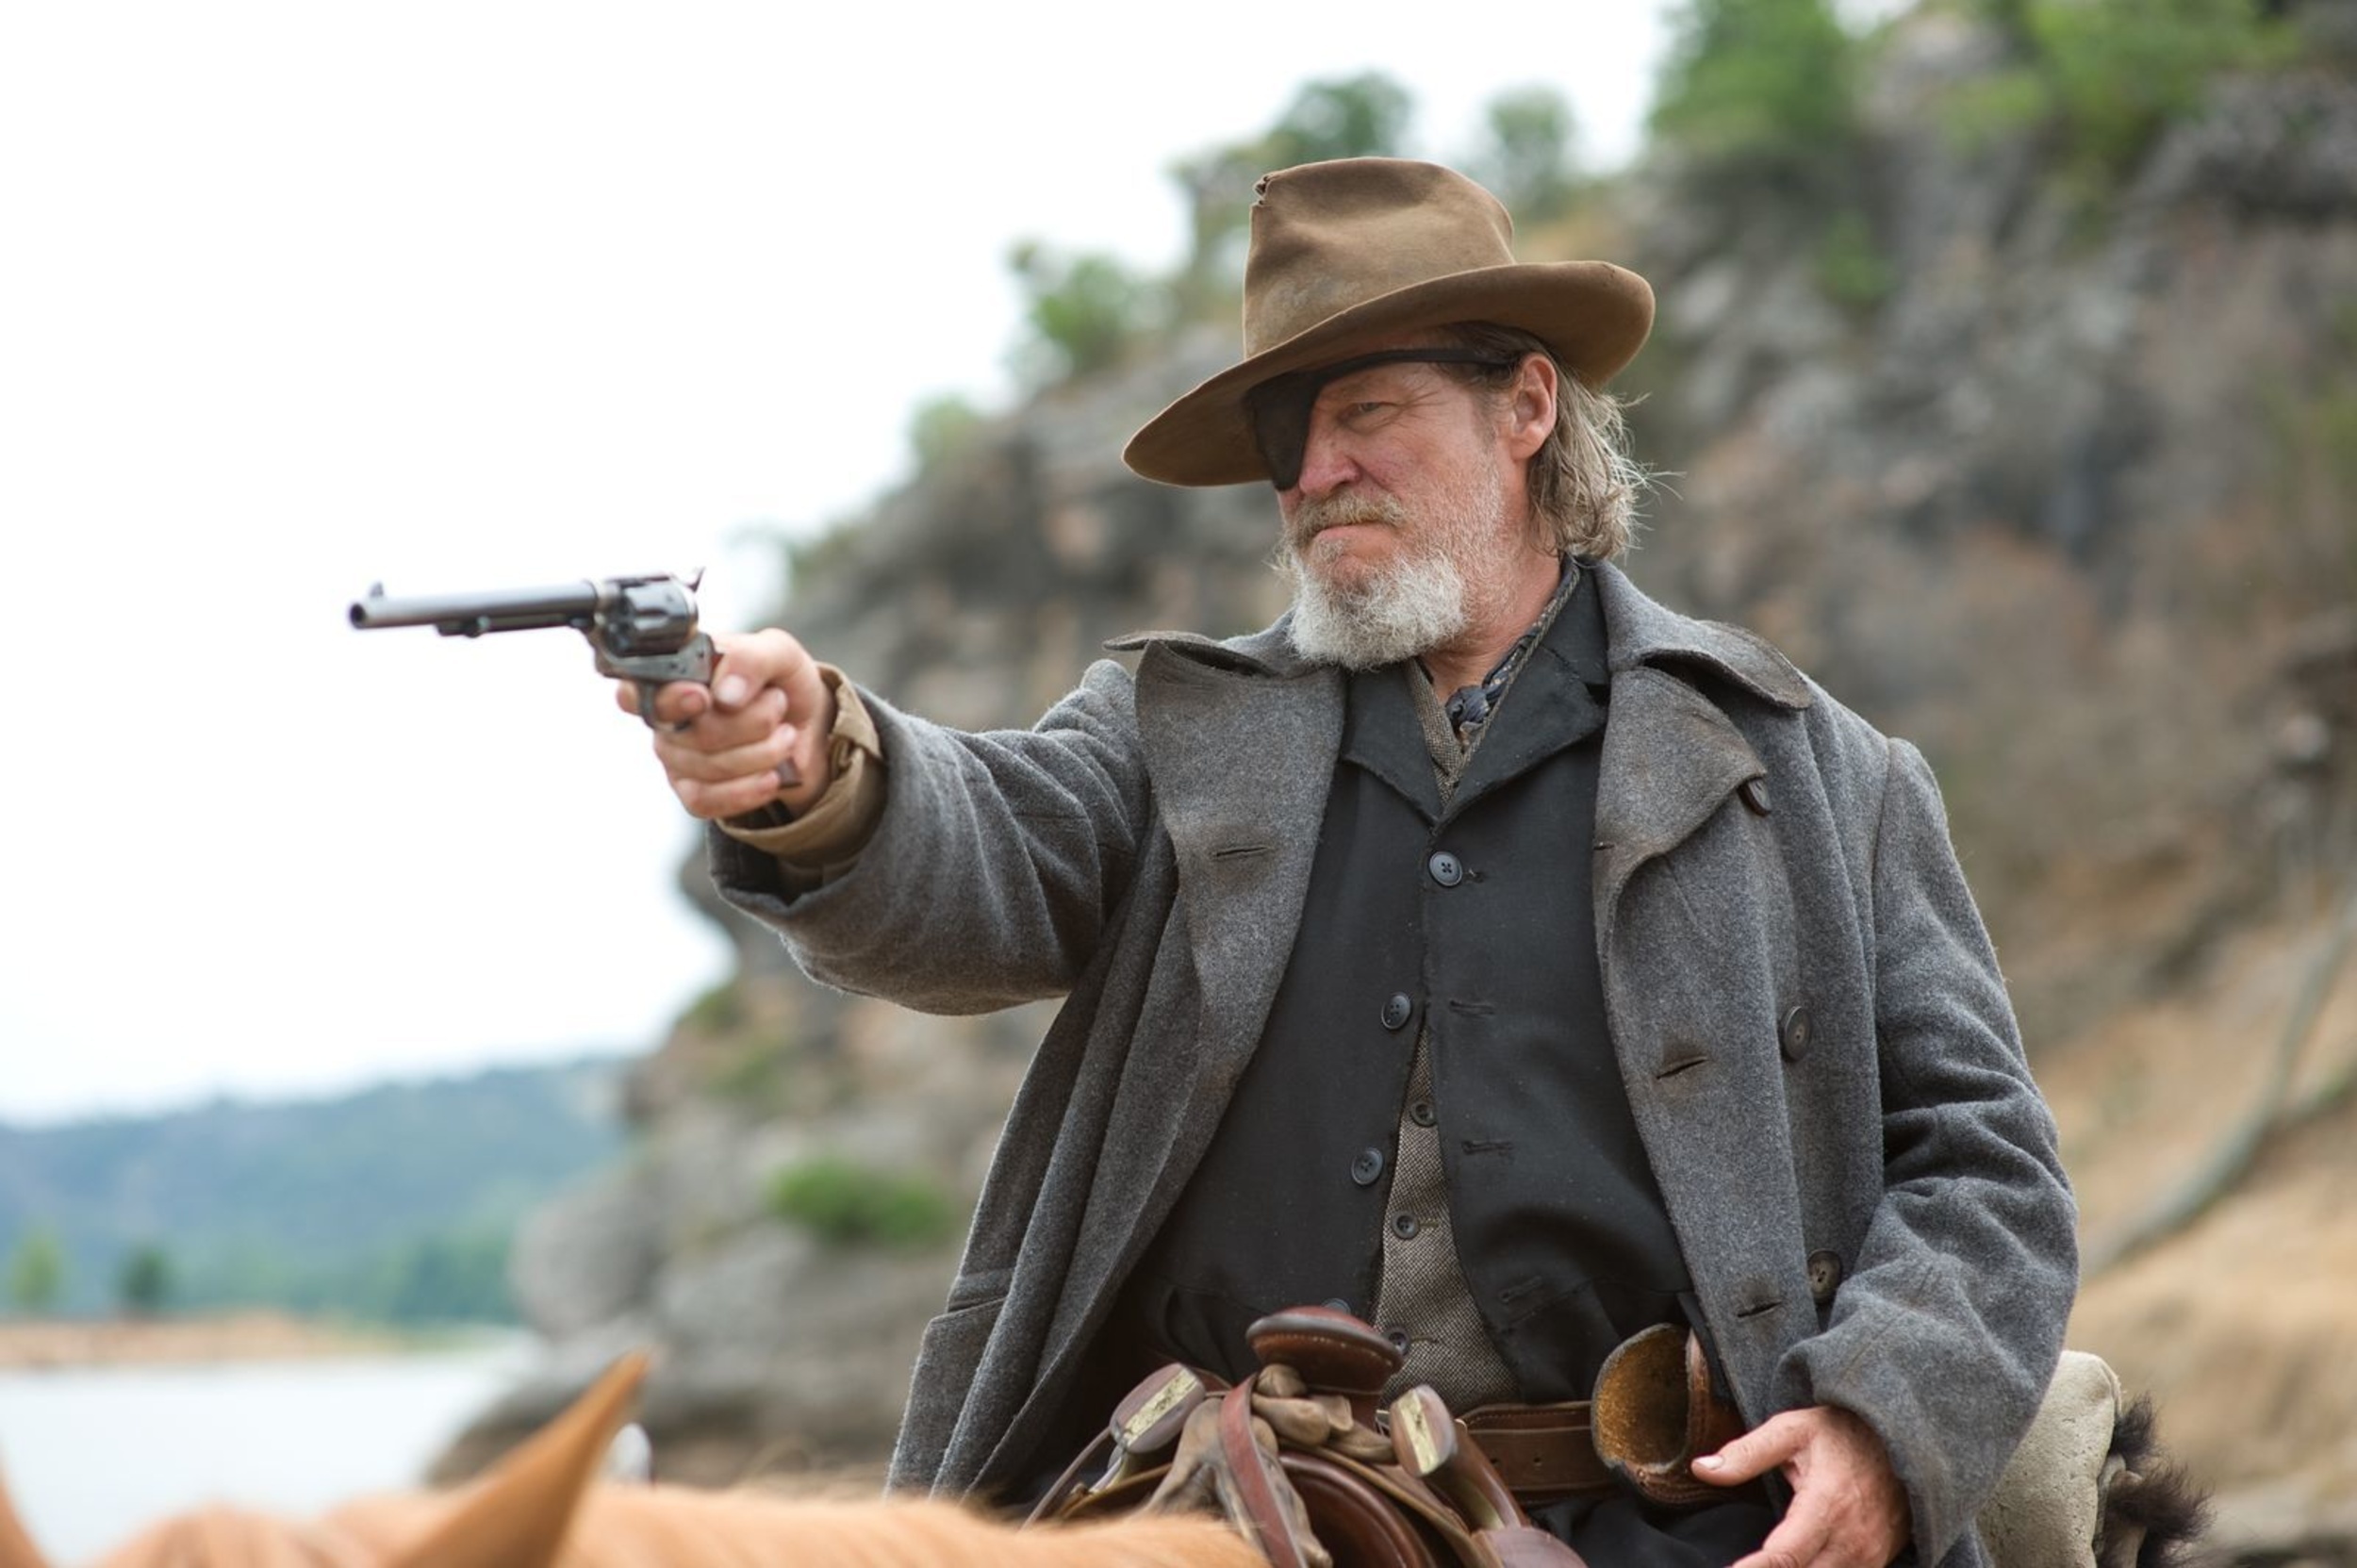 <p>Funnily enough, if the Academy hadn’t given Bridges an Oscar for <em>Crazy Heart</em>, they probably would have given him it for <em>True Grit</em>. Reuniting with the Coen Brothers, Bridges played Rooster Cogburn, the role that won John Wayne his Oscar. It’s similar to his <em>Crazy Heart </em>turn, but better. He got the Best Actor nomination, but the Academy wasn’t going to reward Bridges in back-to-back years.</p><p>You may also like: <a href='https://www.yardbarker.com/entertainment/articles/the_20_best_found_footage_horror_films/s1__29513177'>The 20 best found-footage horror films</a></p>